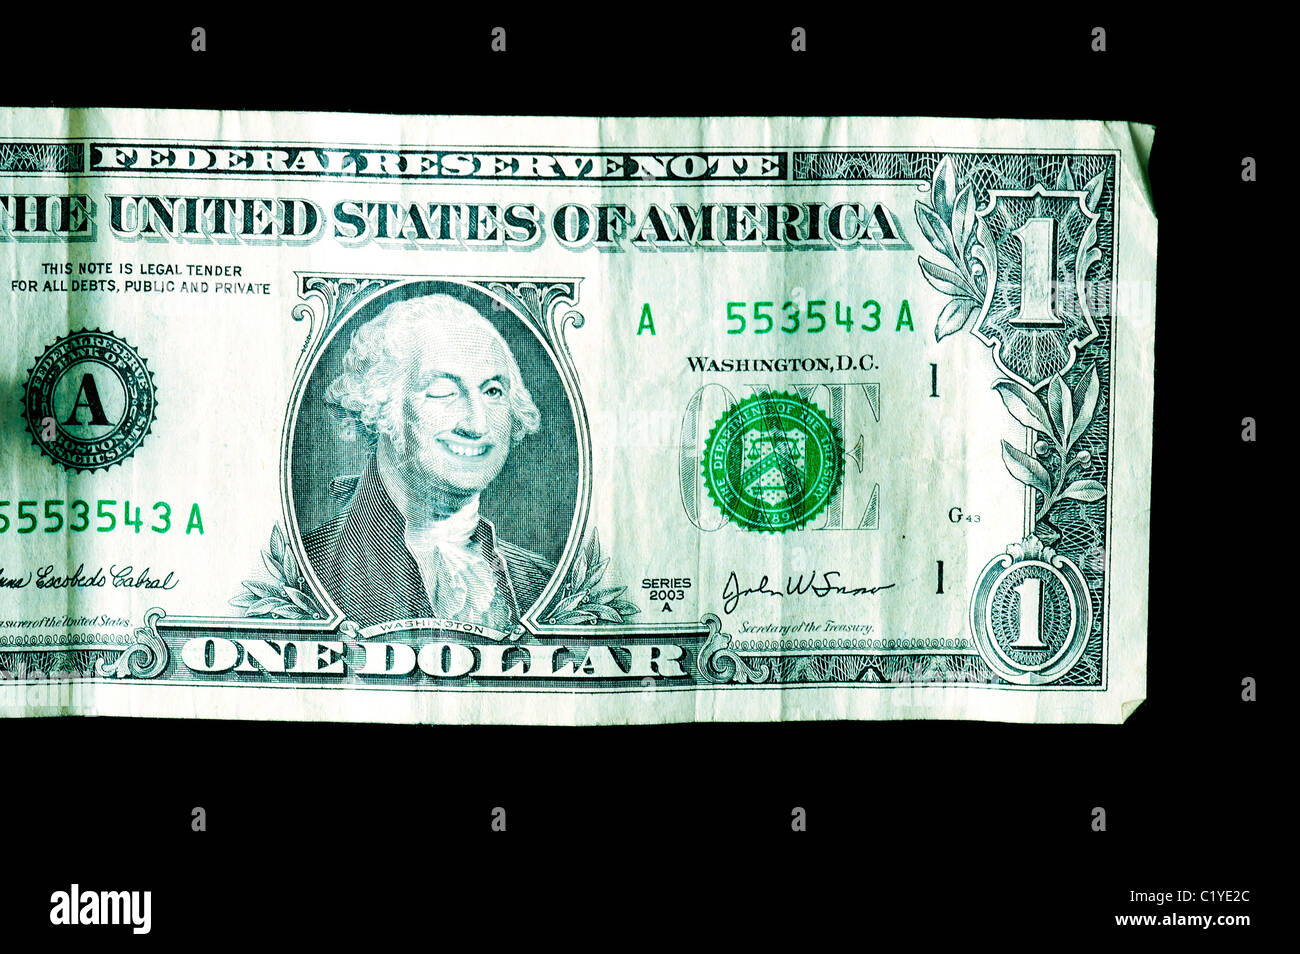 One dollar bill close up; George Washington is smiling and winking. Stock Photo